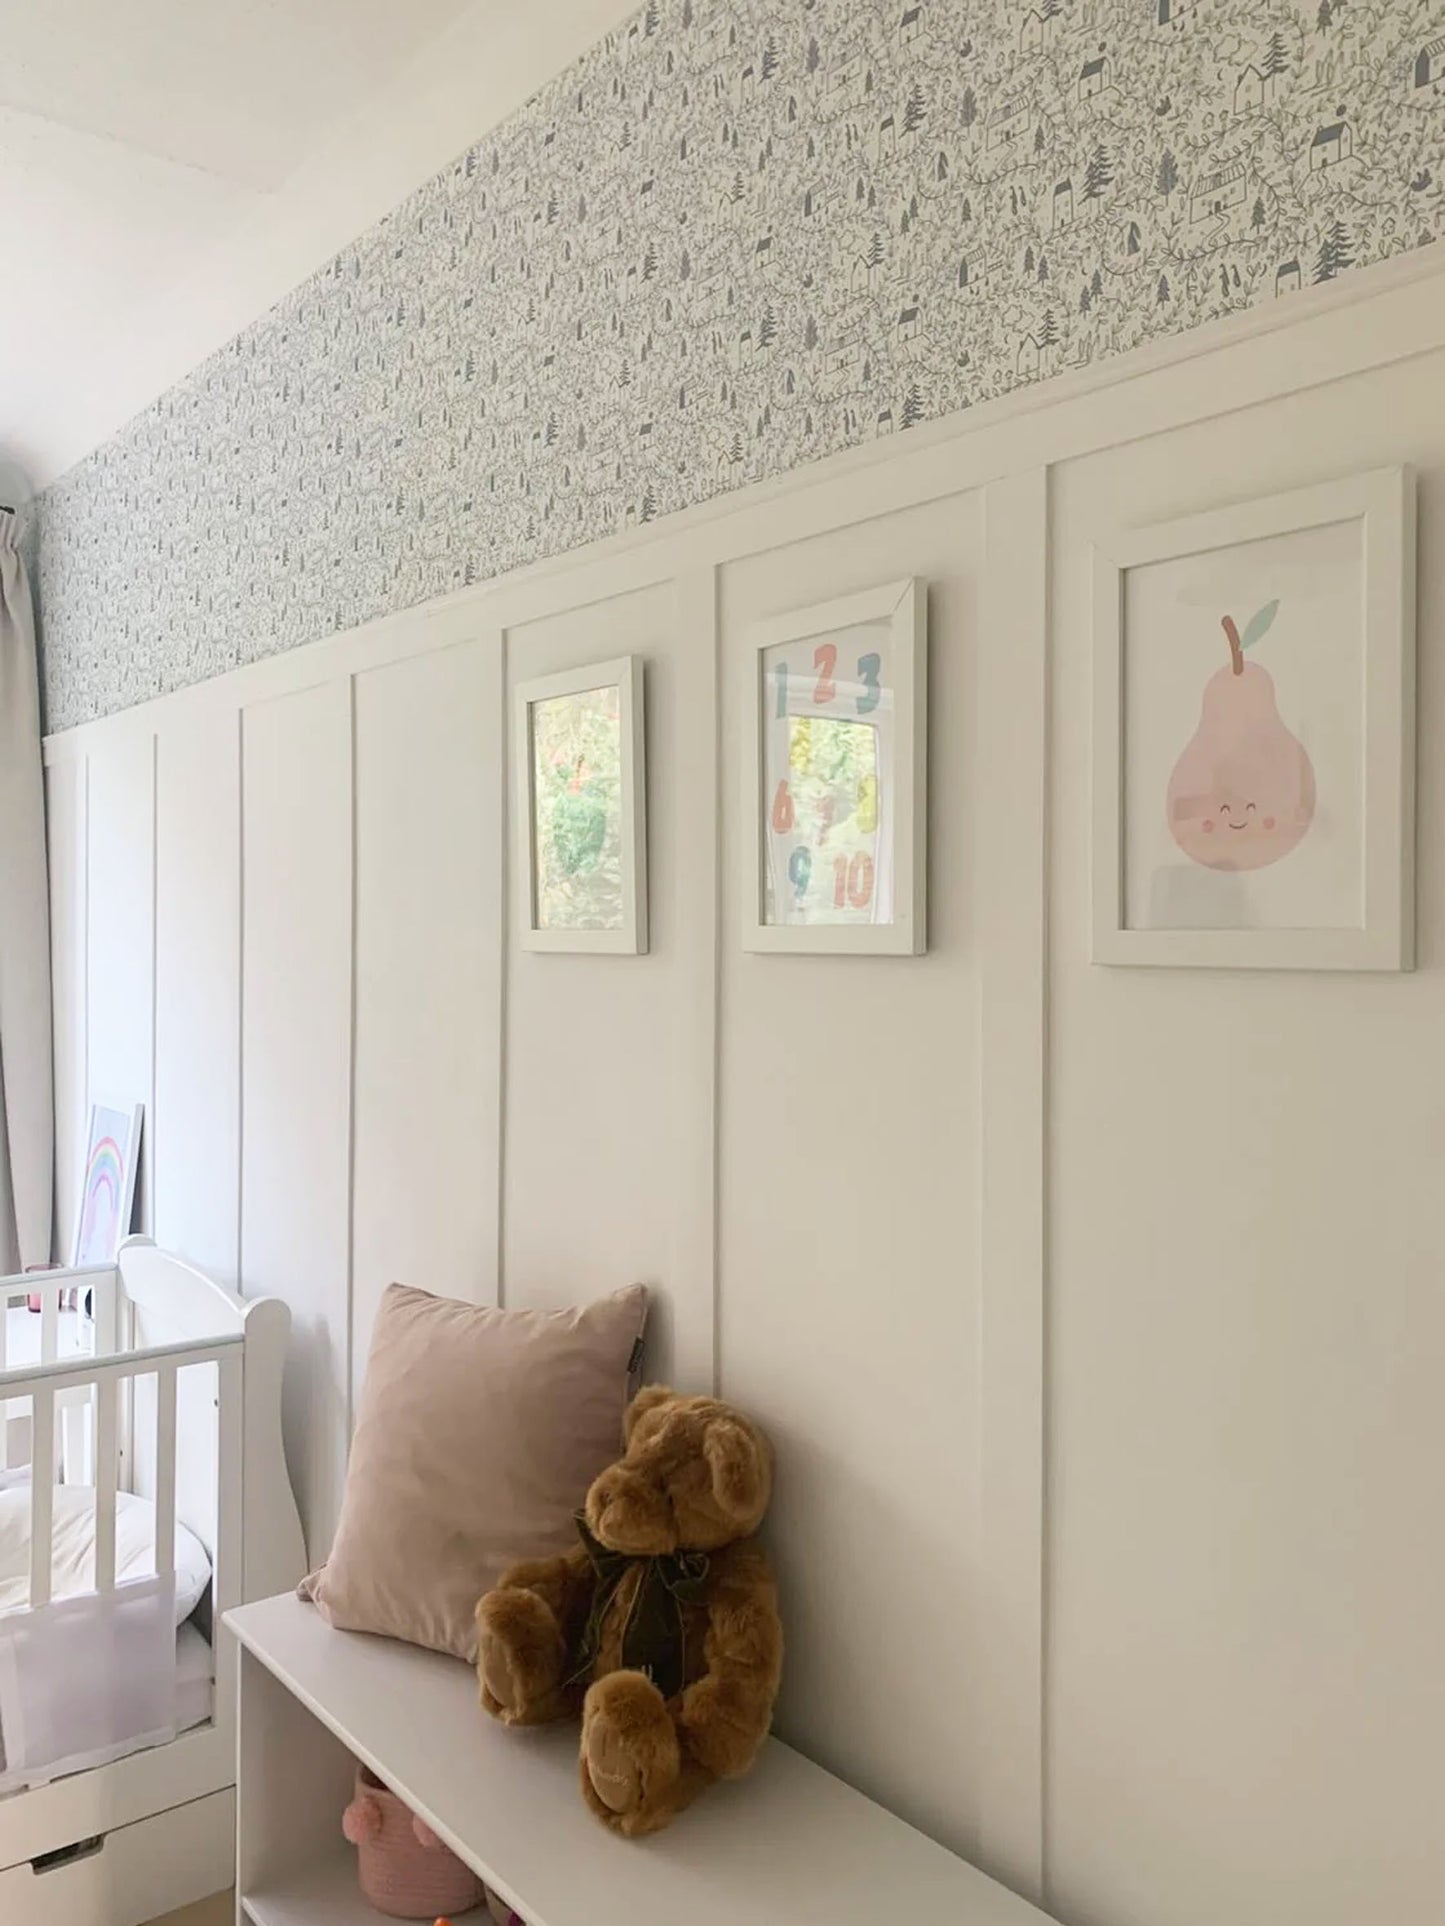 Cottages in the woods luxury children's wallpaper featured in nursery with white wall panelling